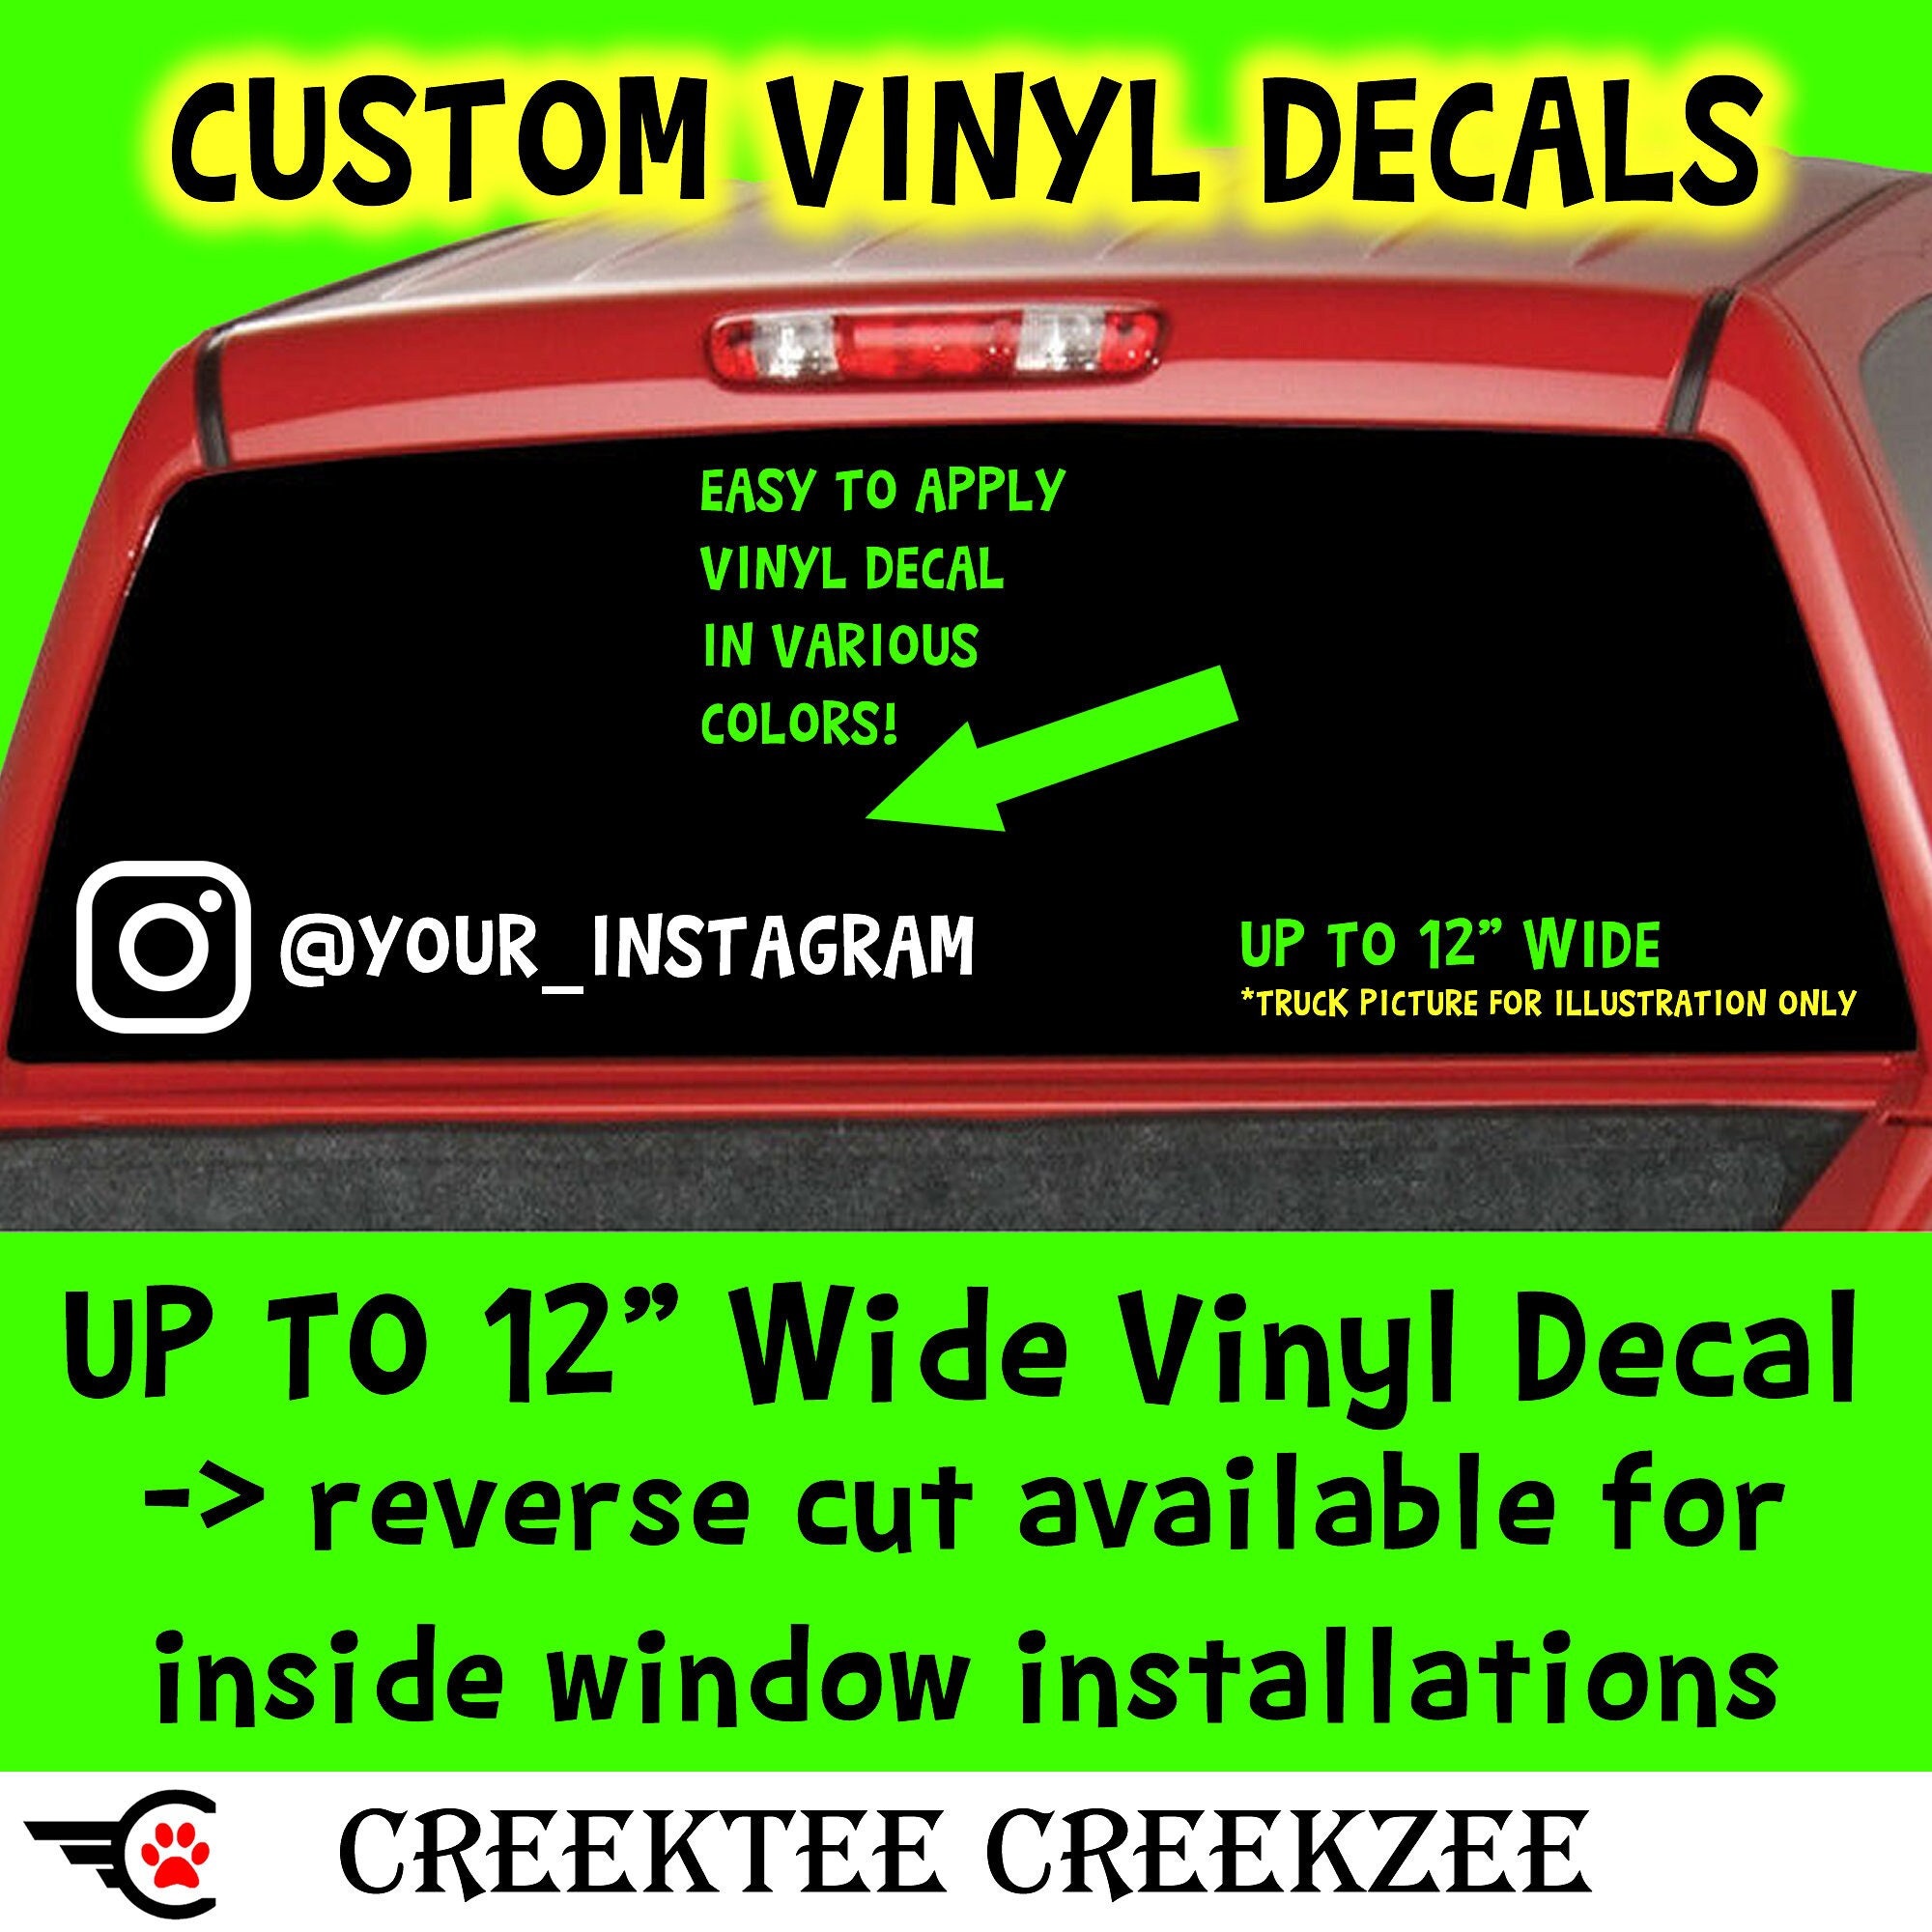 Instagram Vinyl Decal in Color Vinyl Various Sizes and Colors Die Cut Vinyl Decal also in Cool Chrome Colors!